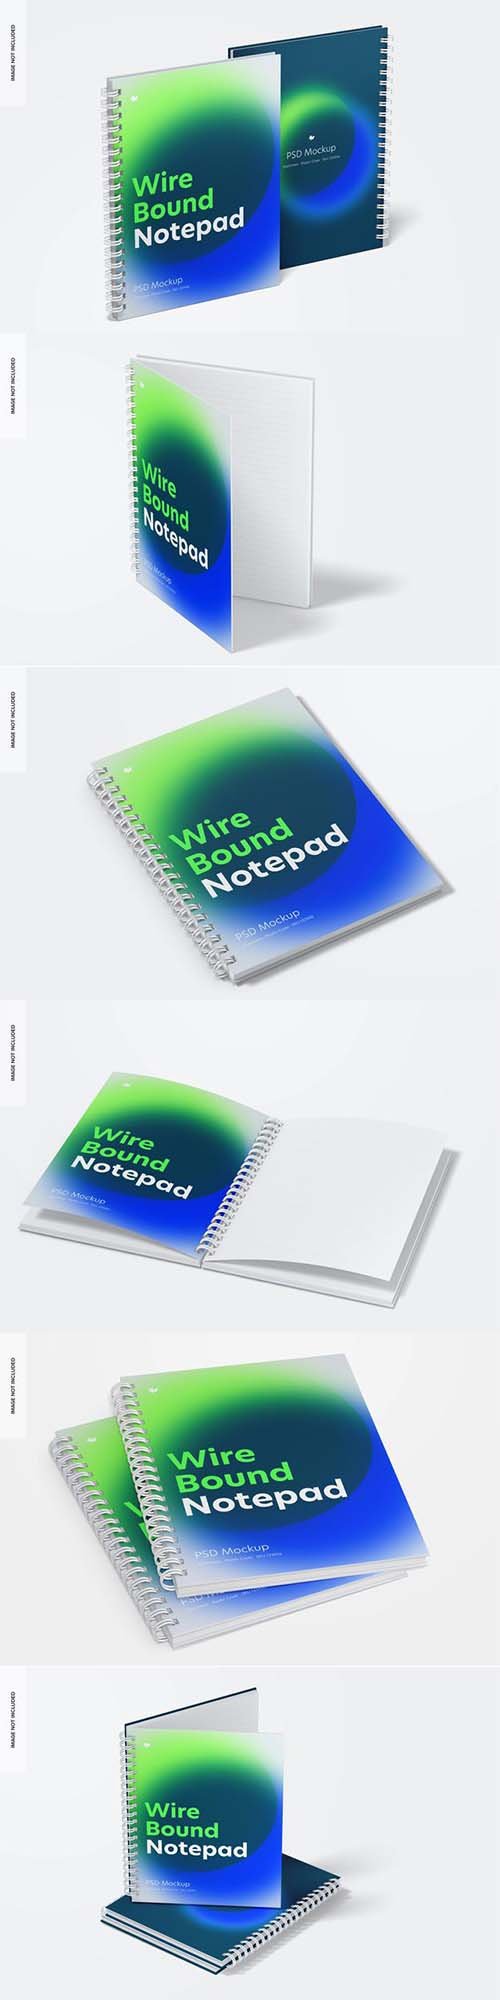 Plastic cover wire bound notepads mockup